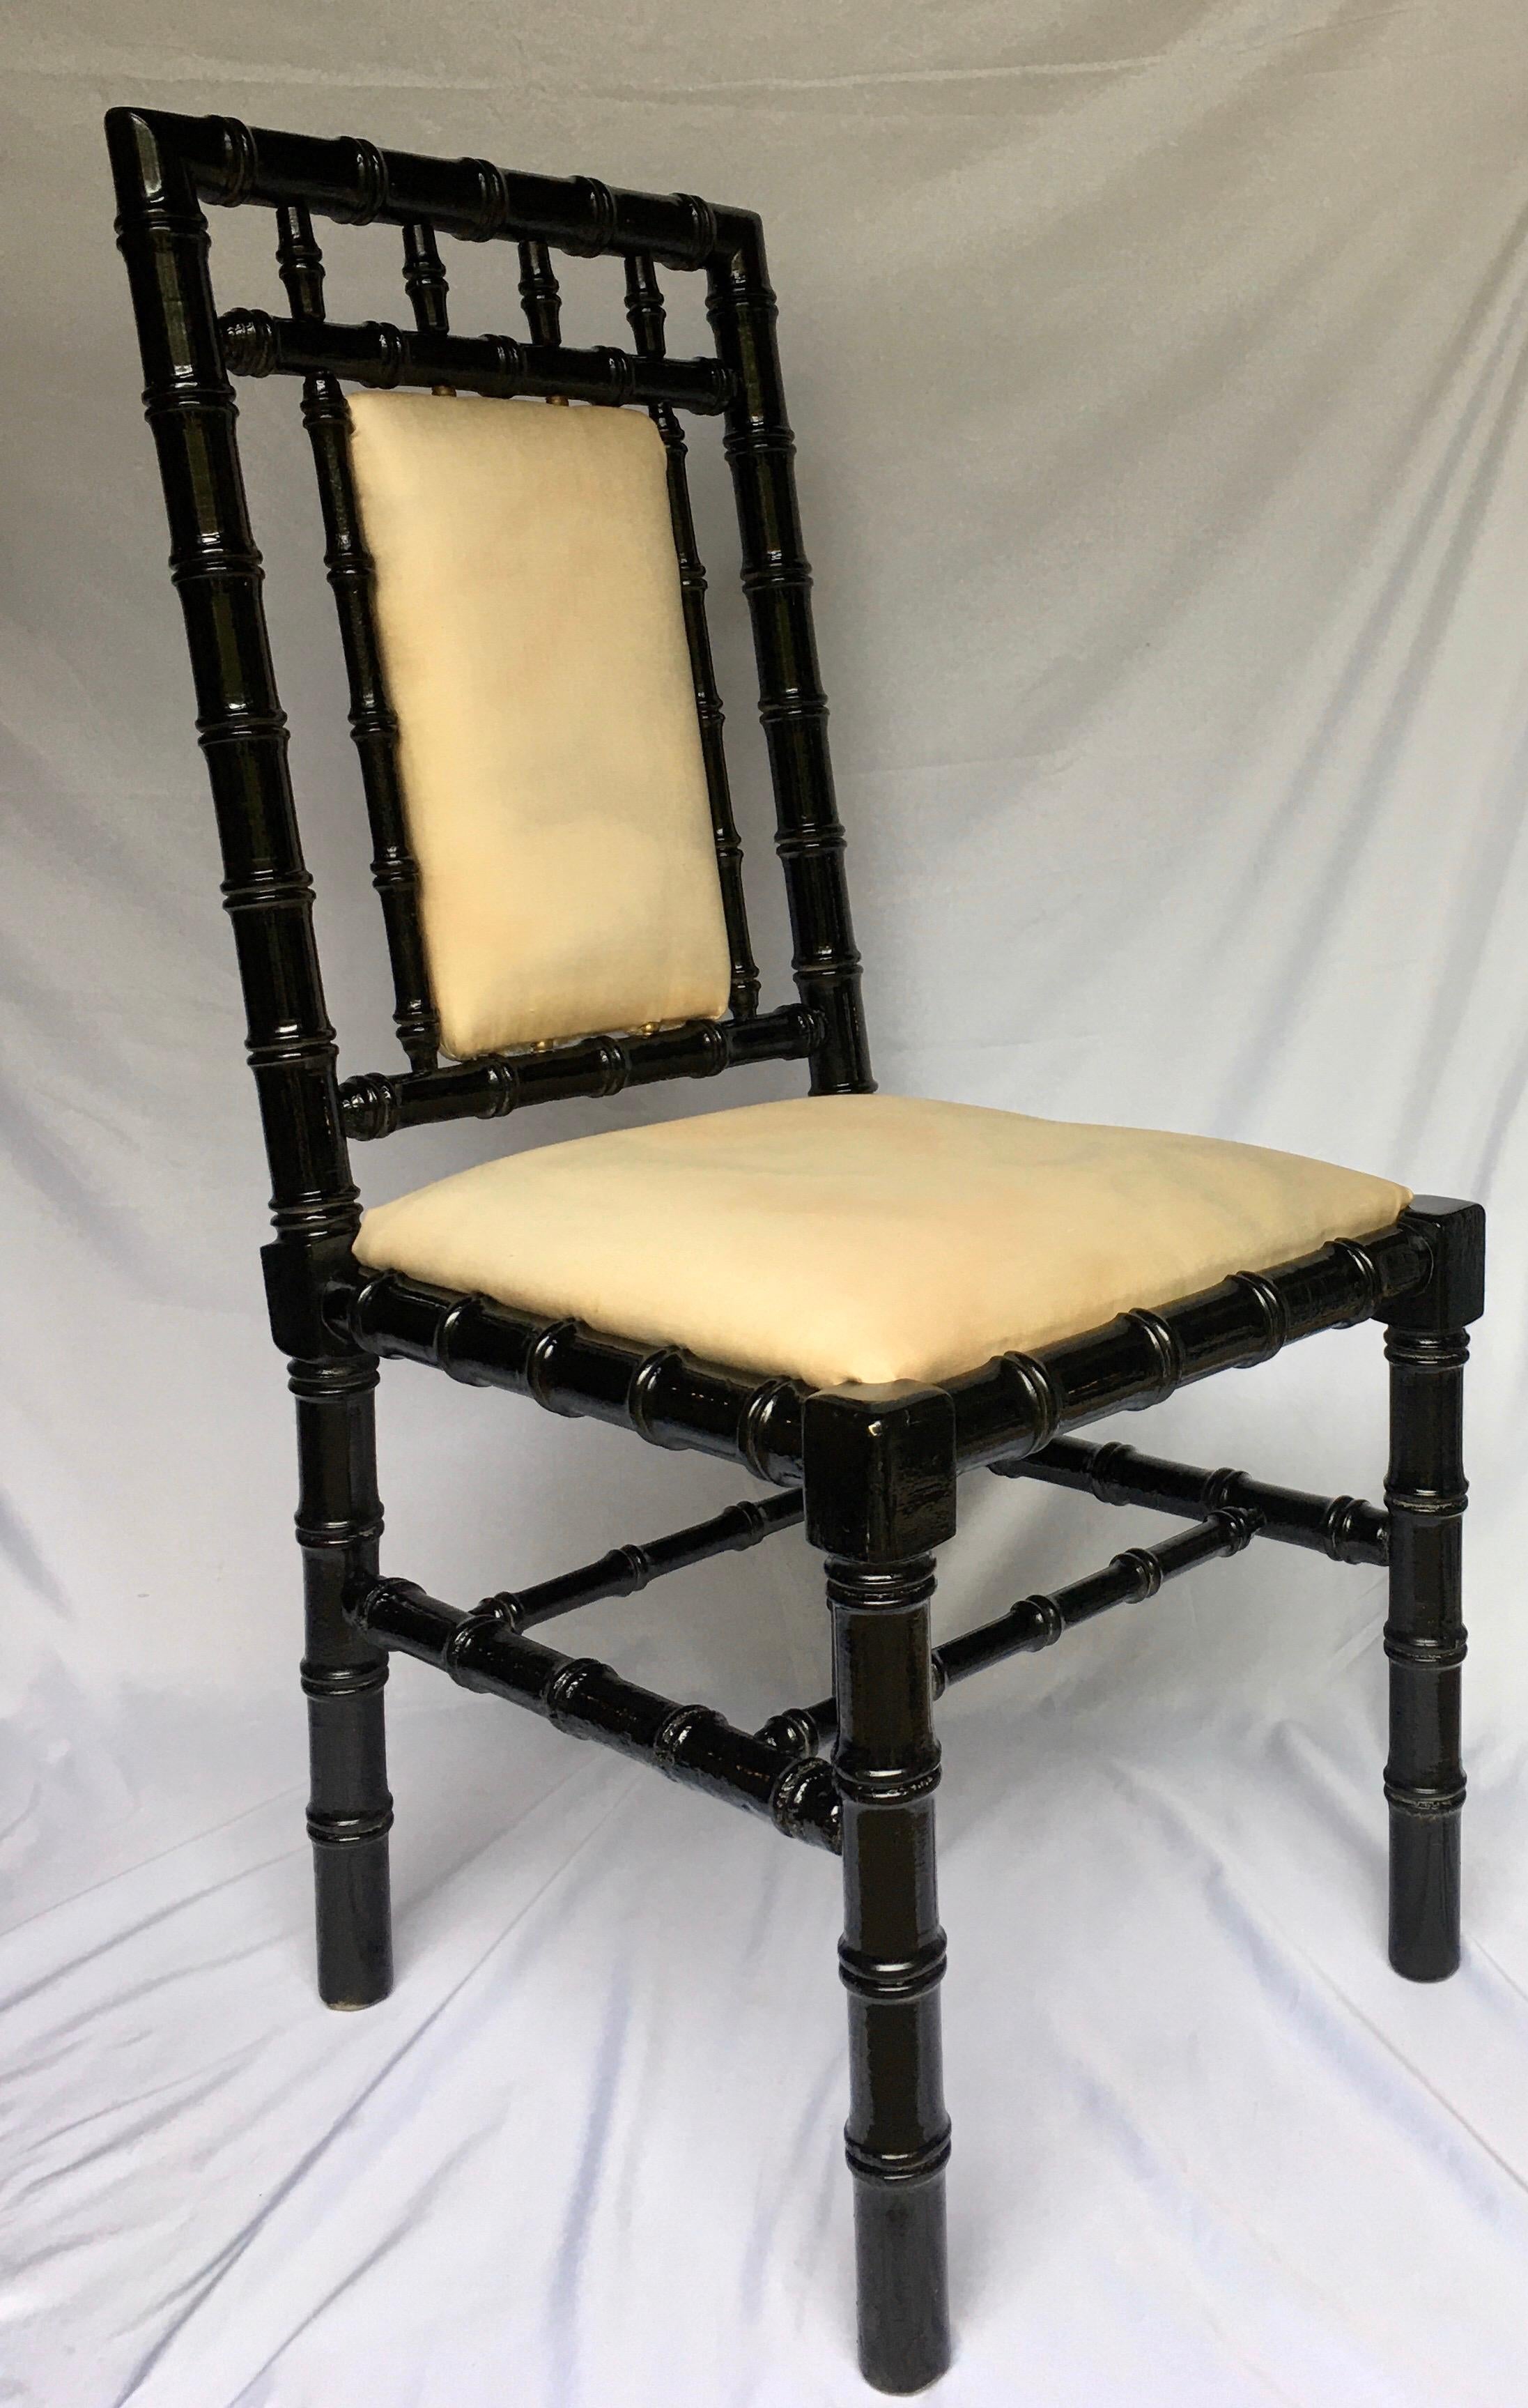 Chinoiserie style faux bamboo side accent chair with brass hardware. This Mid-Century Modern desk chair features a black gloss lacquered finish and original marbleized upholstery.